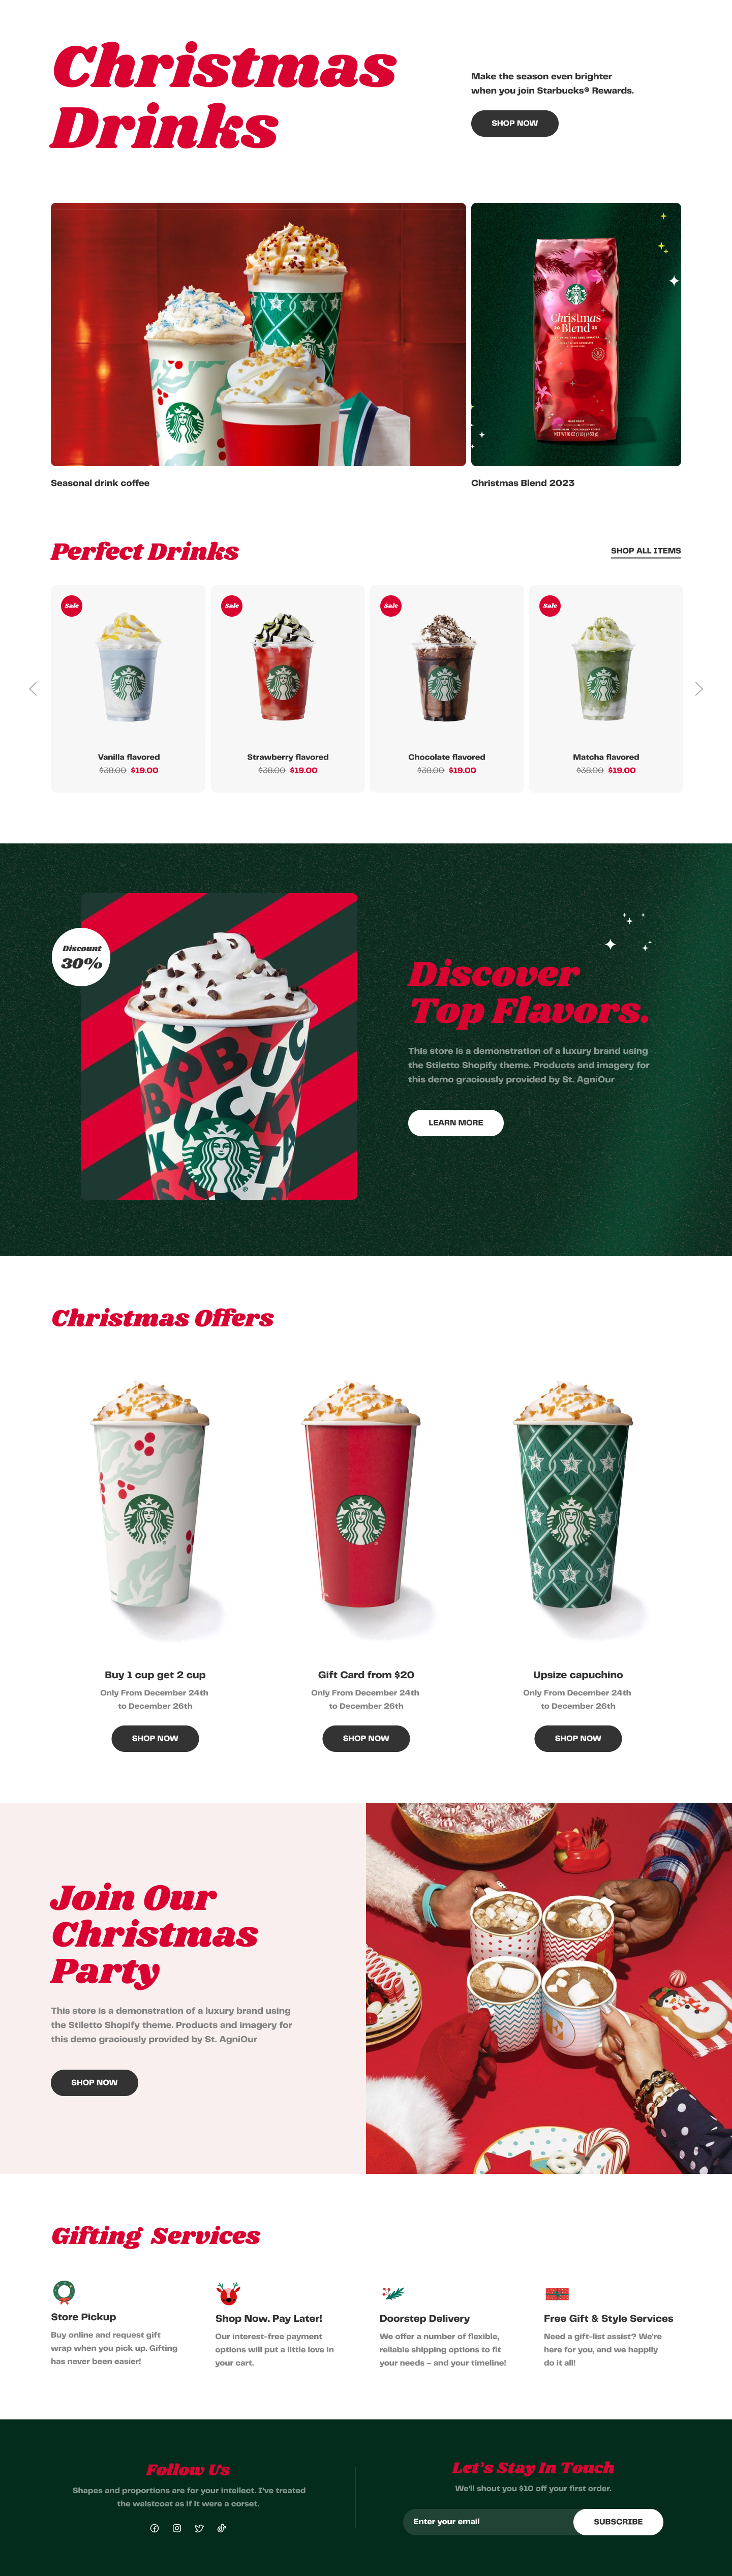 Wesite design templates for Christmas and Holiday season